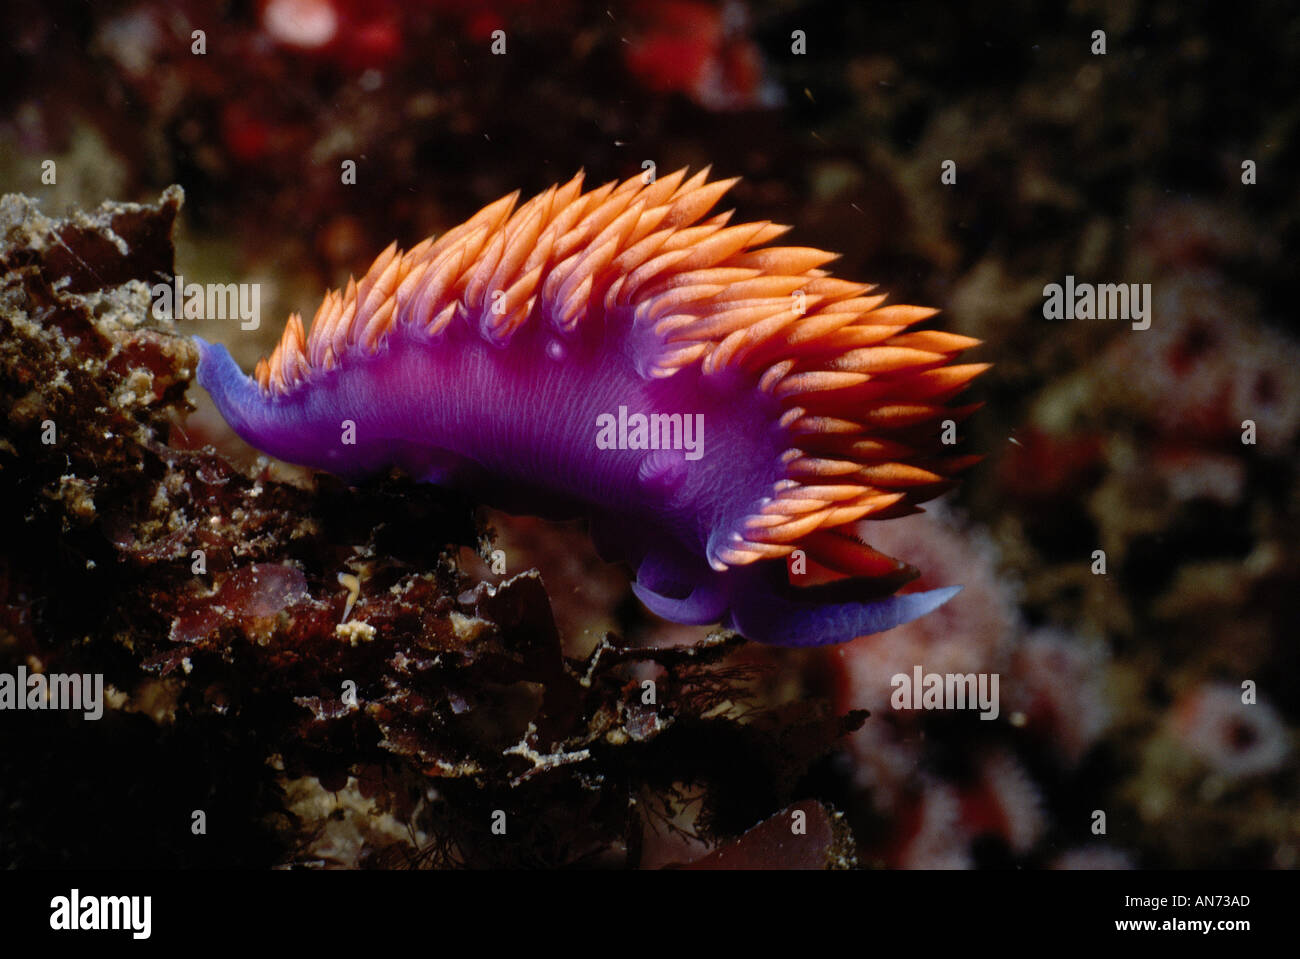 Spanish Shawl Nudibranch feeds on hydroids Stock Photo